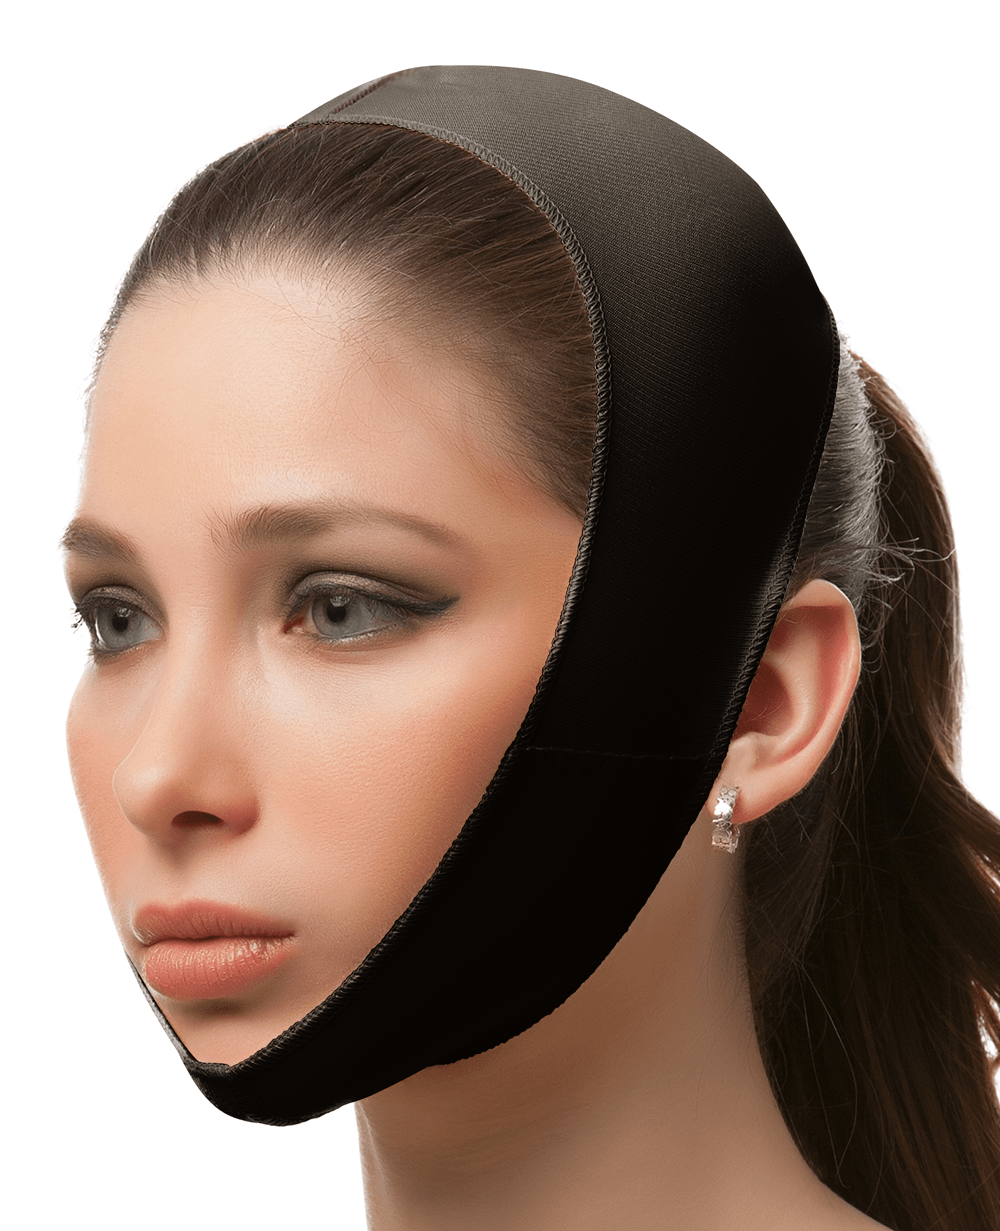 Do You Need to Wear a Compression Garment After Chin Liposuction